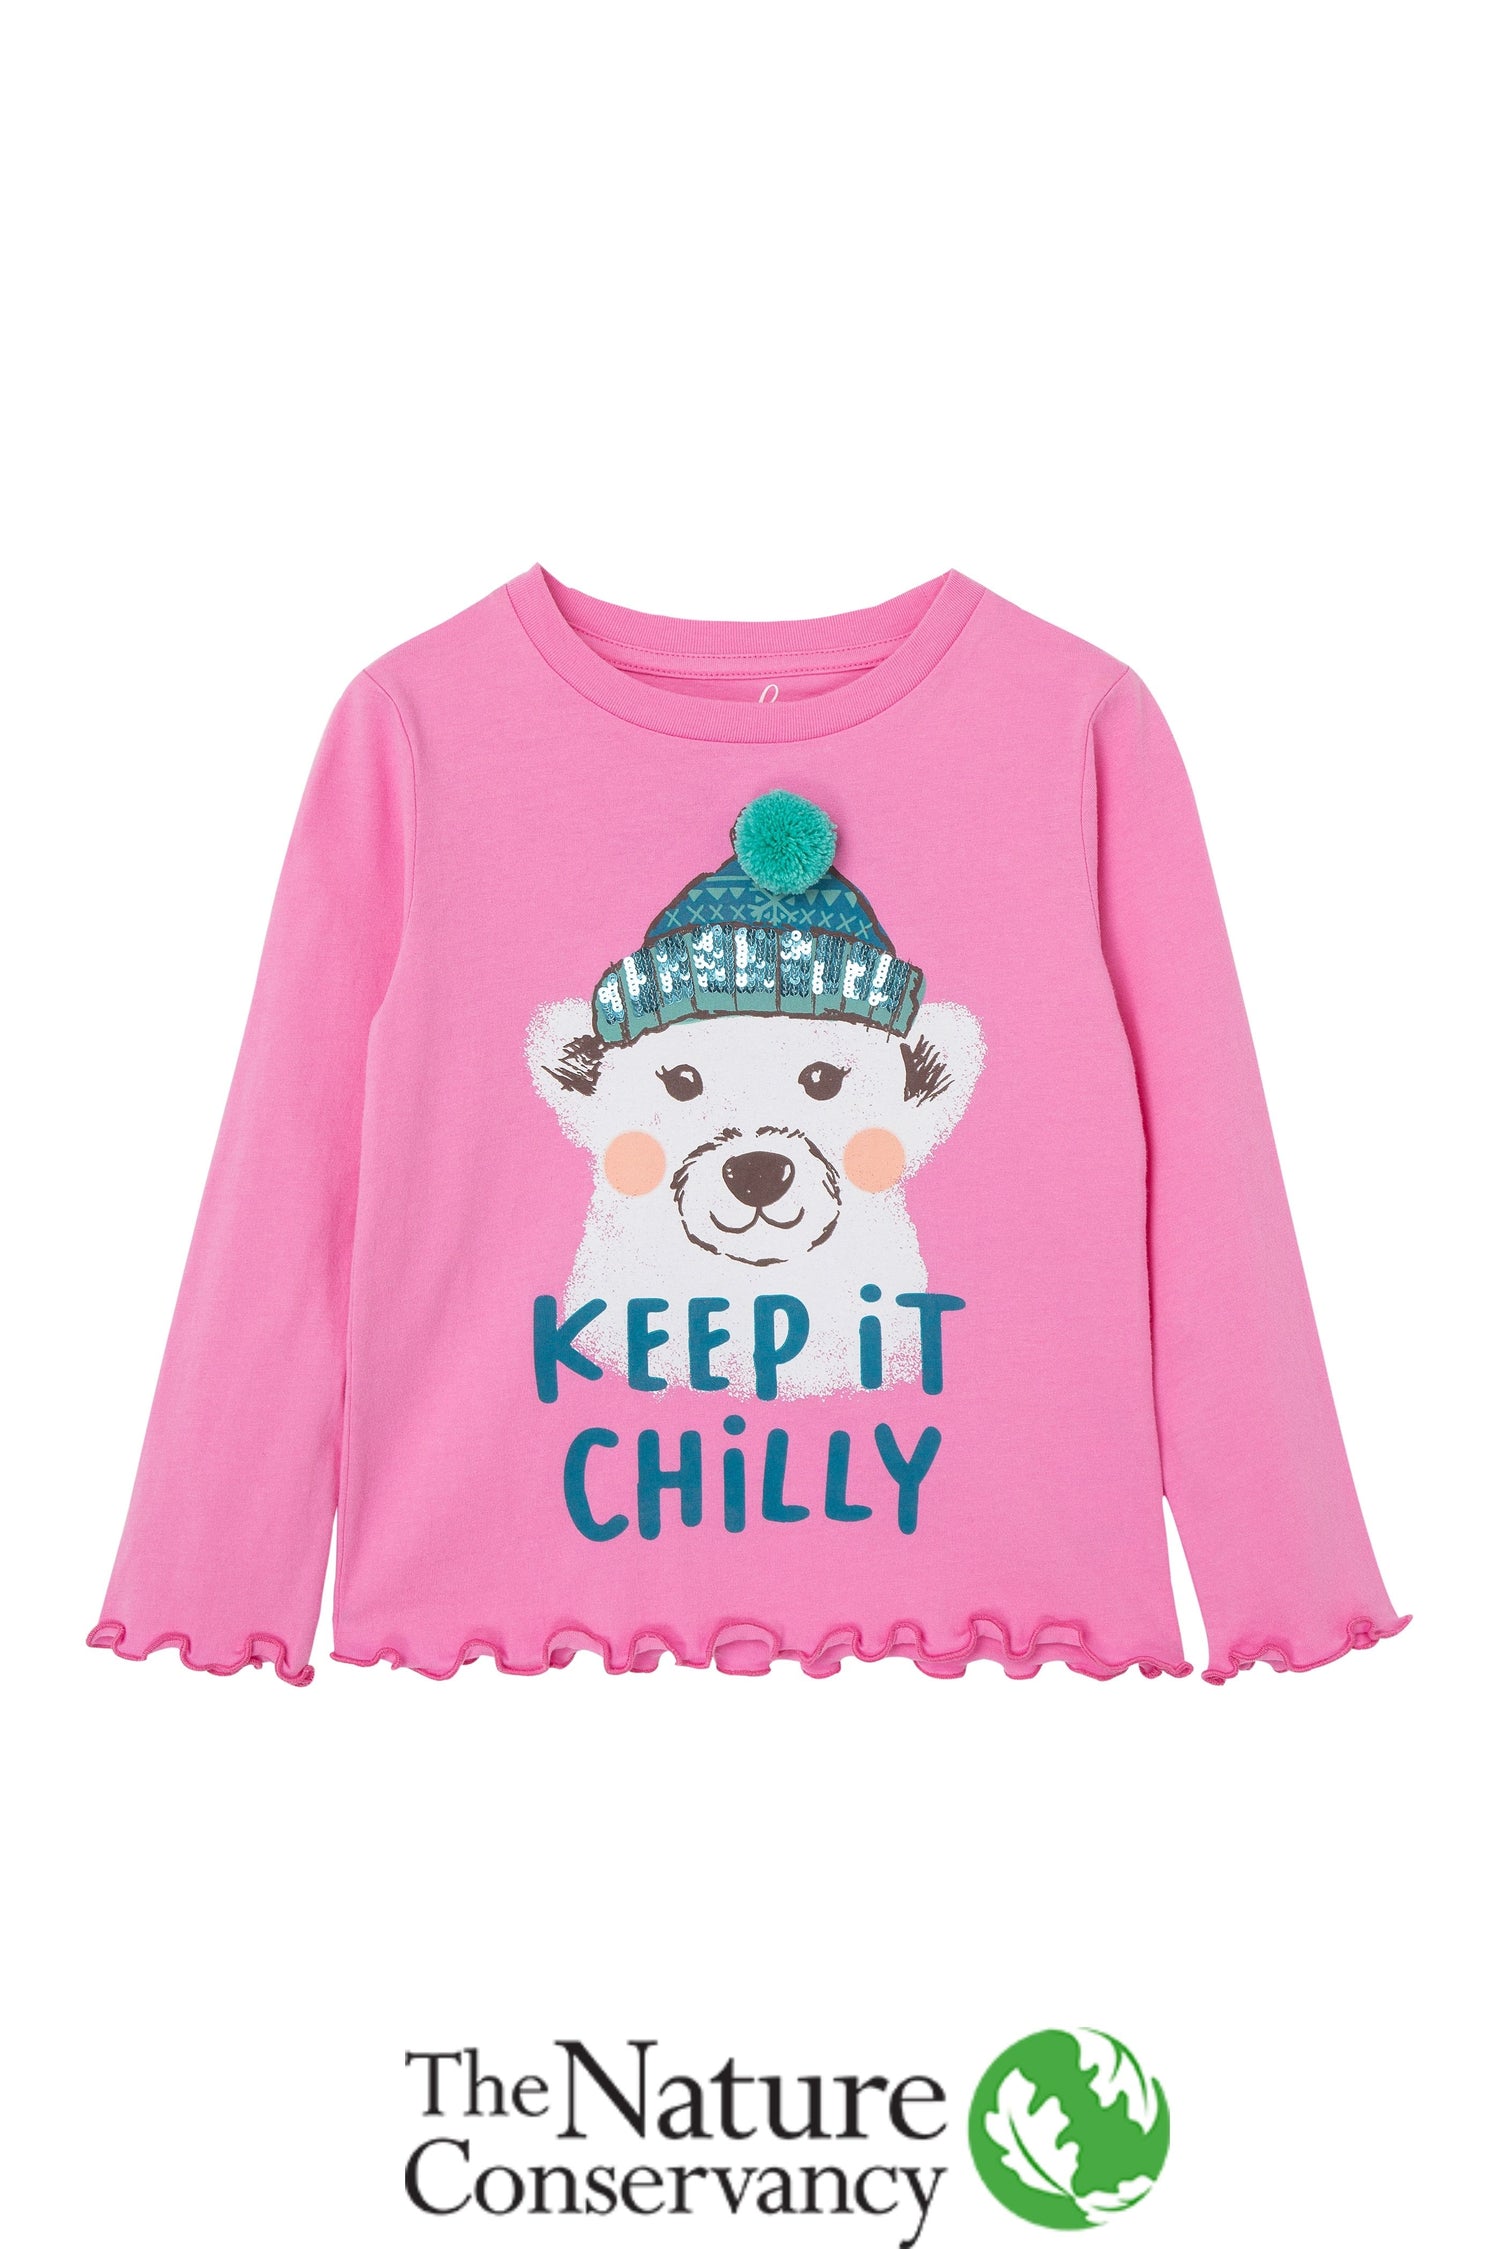 Front pink long sleeve with a polar bear and "keep it chilly" written